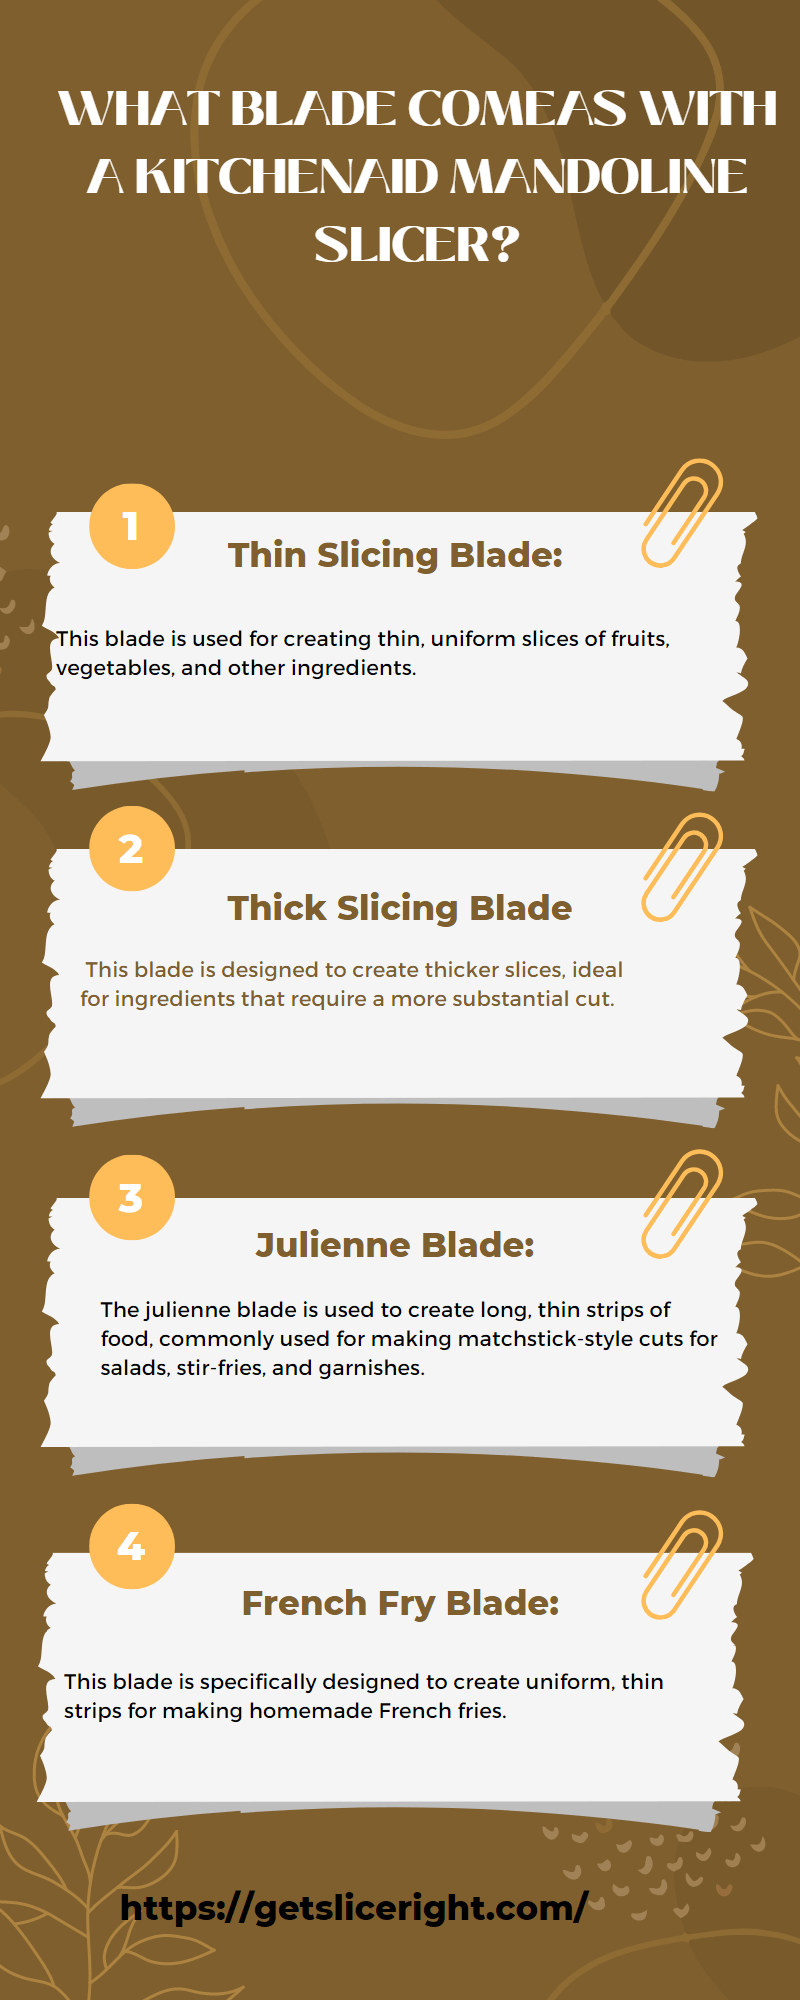 What blade comes with a kitchenaid mandoline slicer - getsliceright infographic